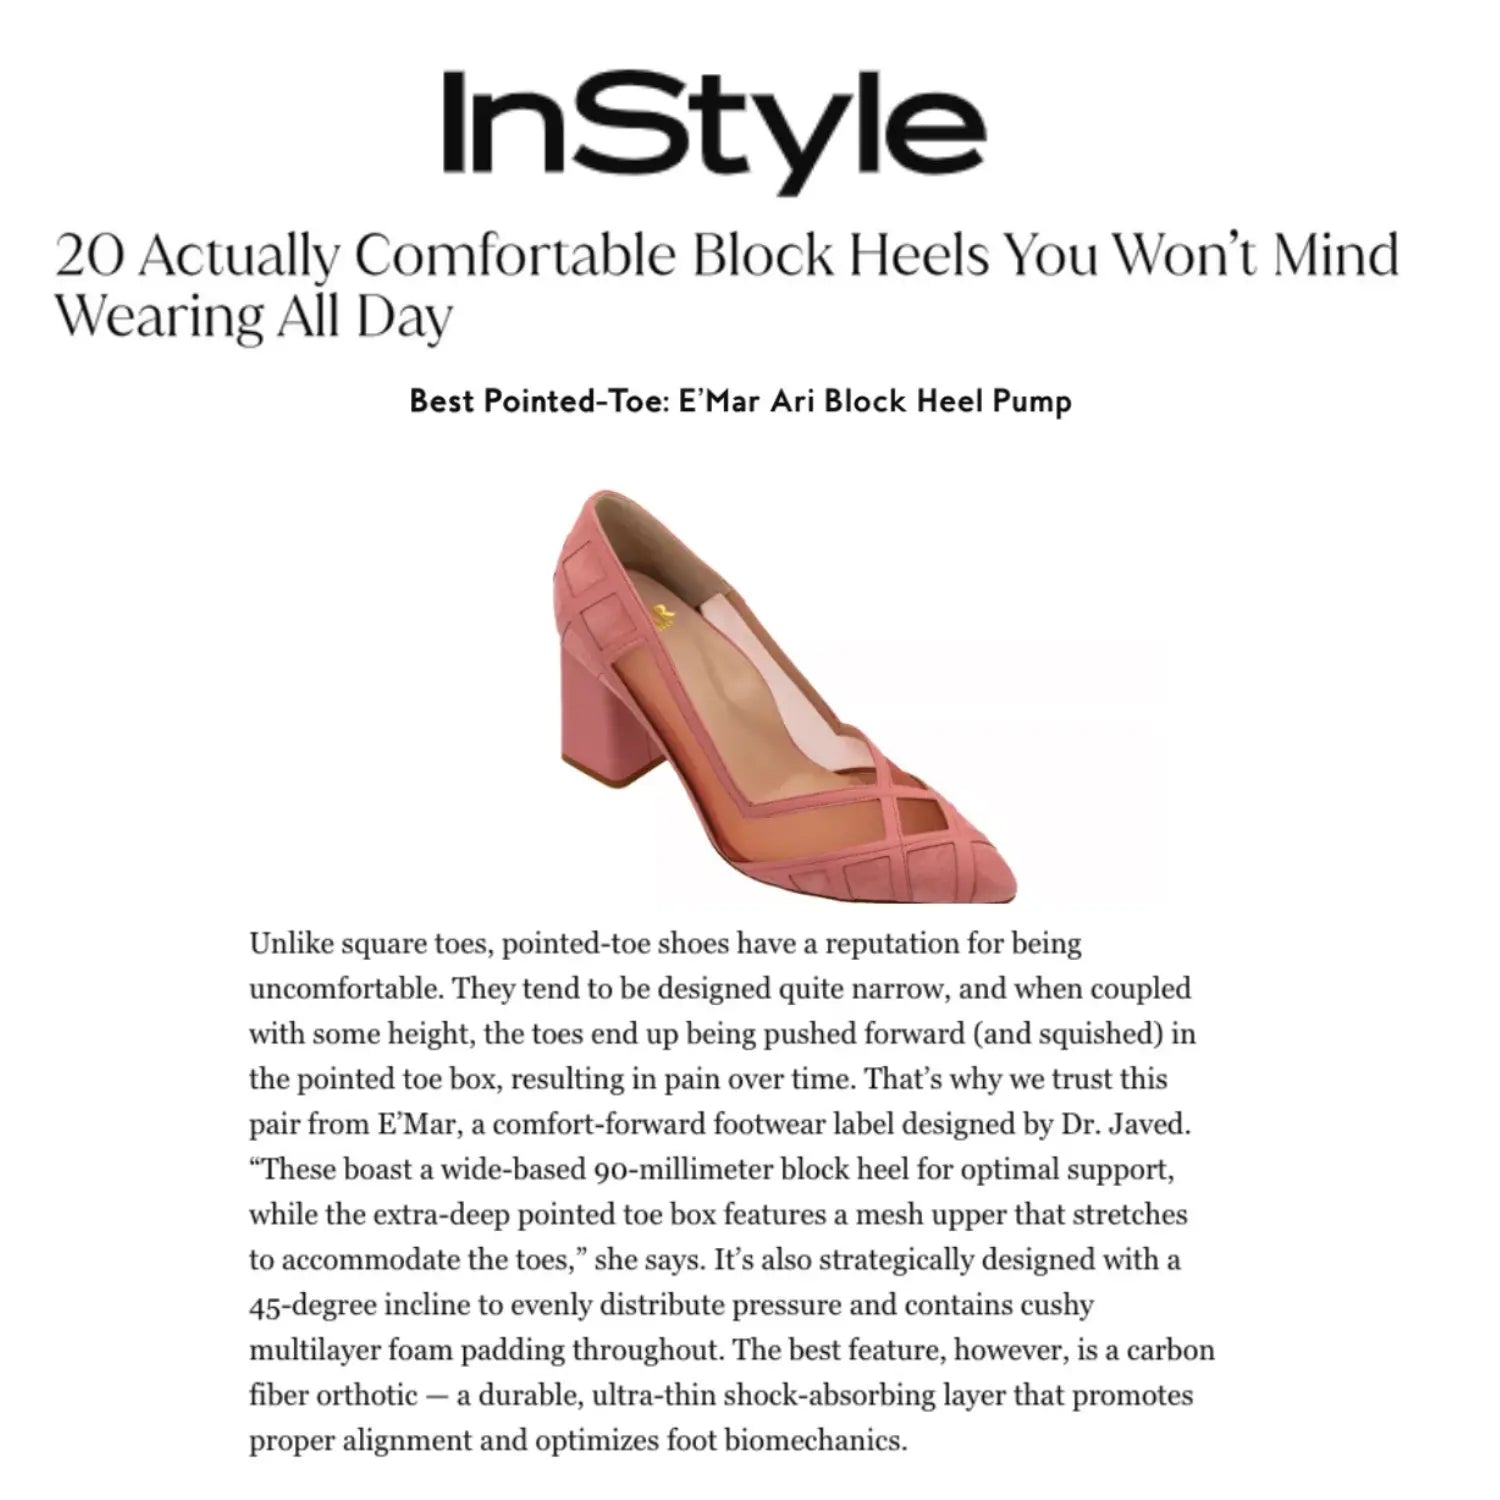 20 Actually Comfortable Block Heels You Won’t Mind Wearing All Day